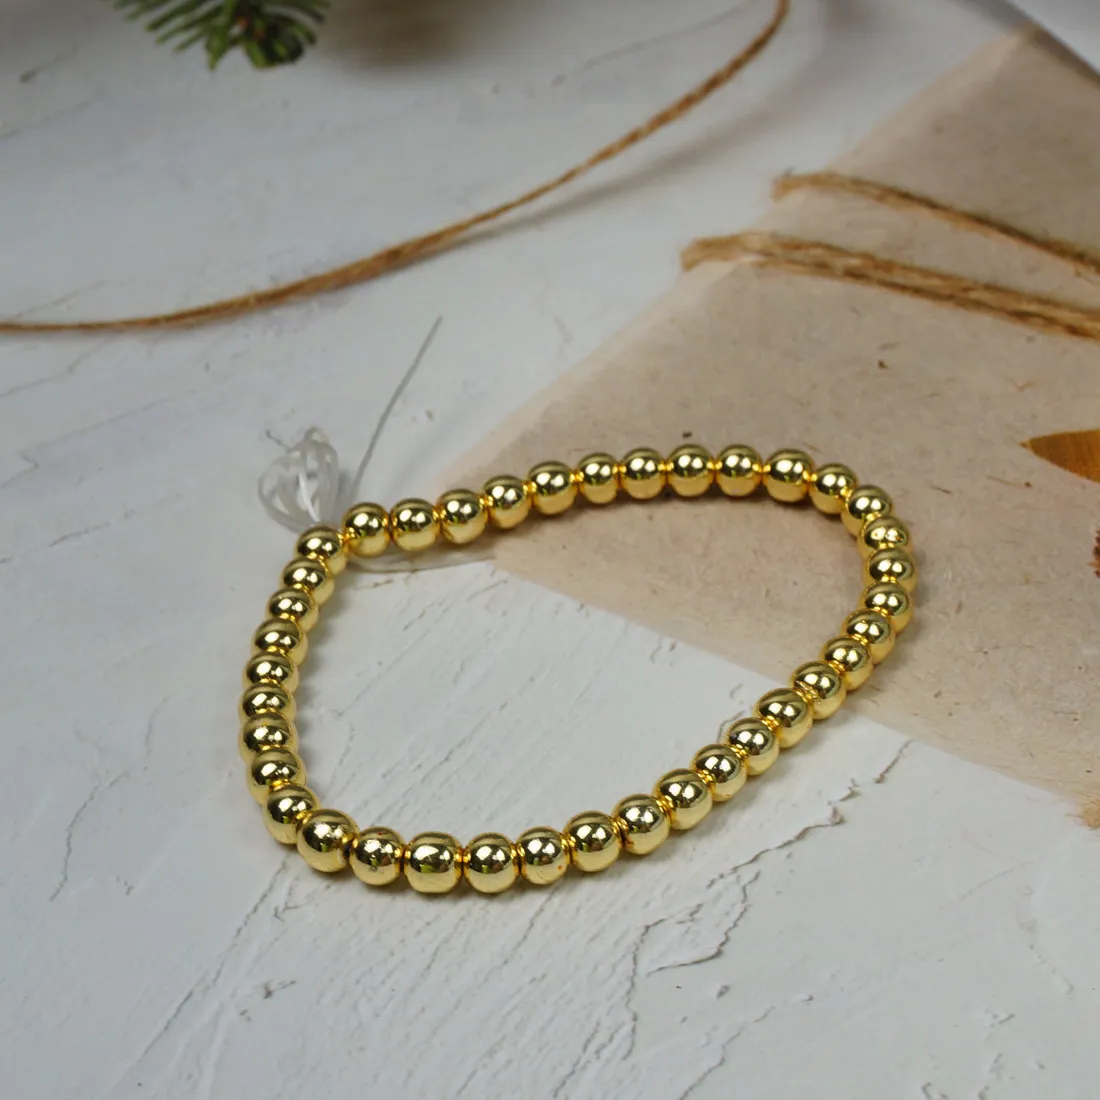 Beaded For Women Gold-plated Beads 6mm Semi-finished Bracelet With Spare Extension Beads And Thread